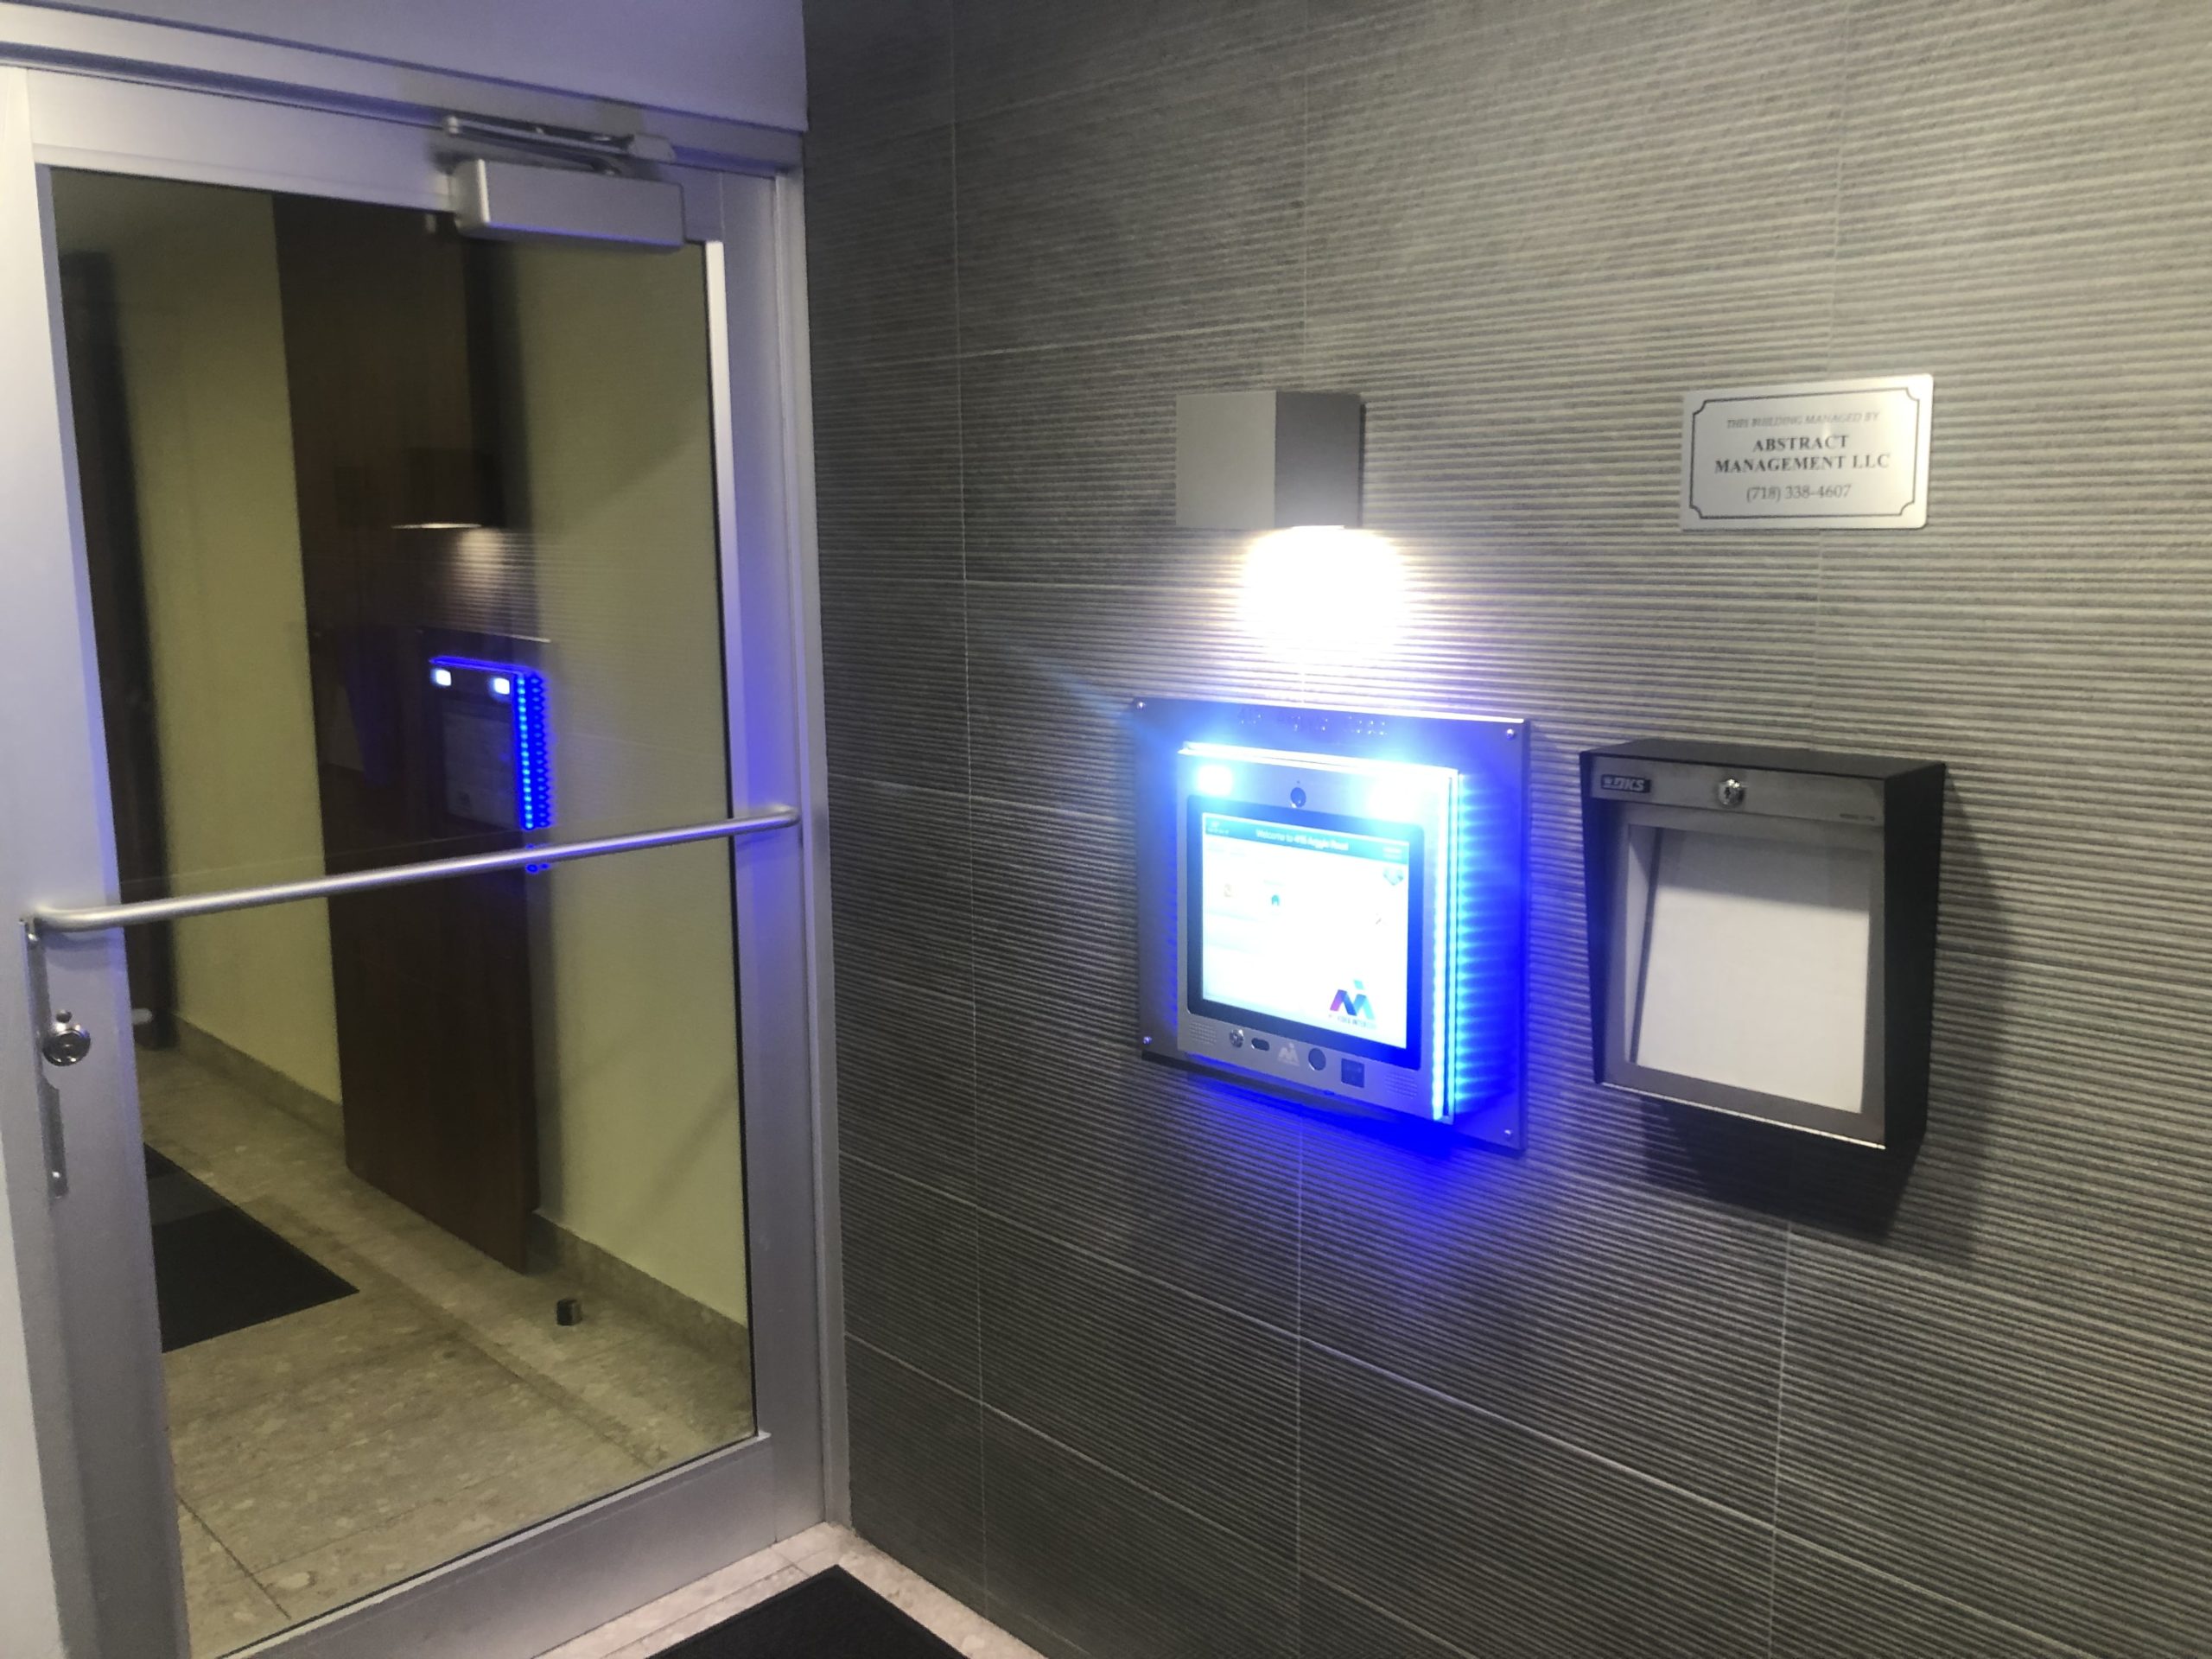 mvi keycom mounted on wall by office entrance